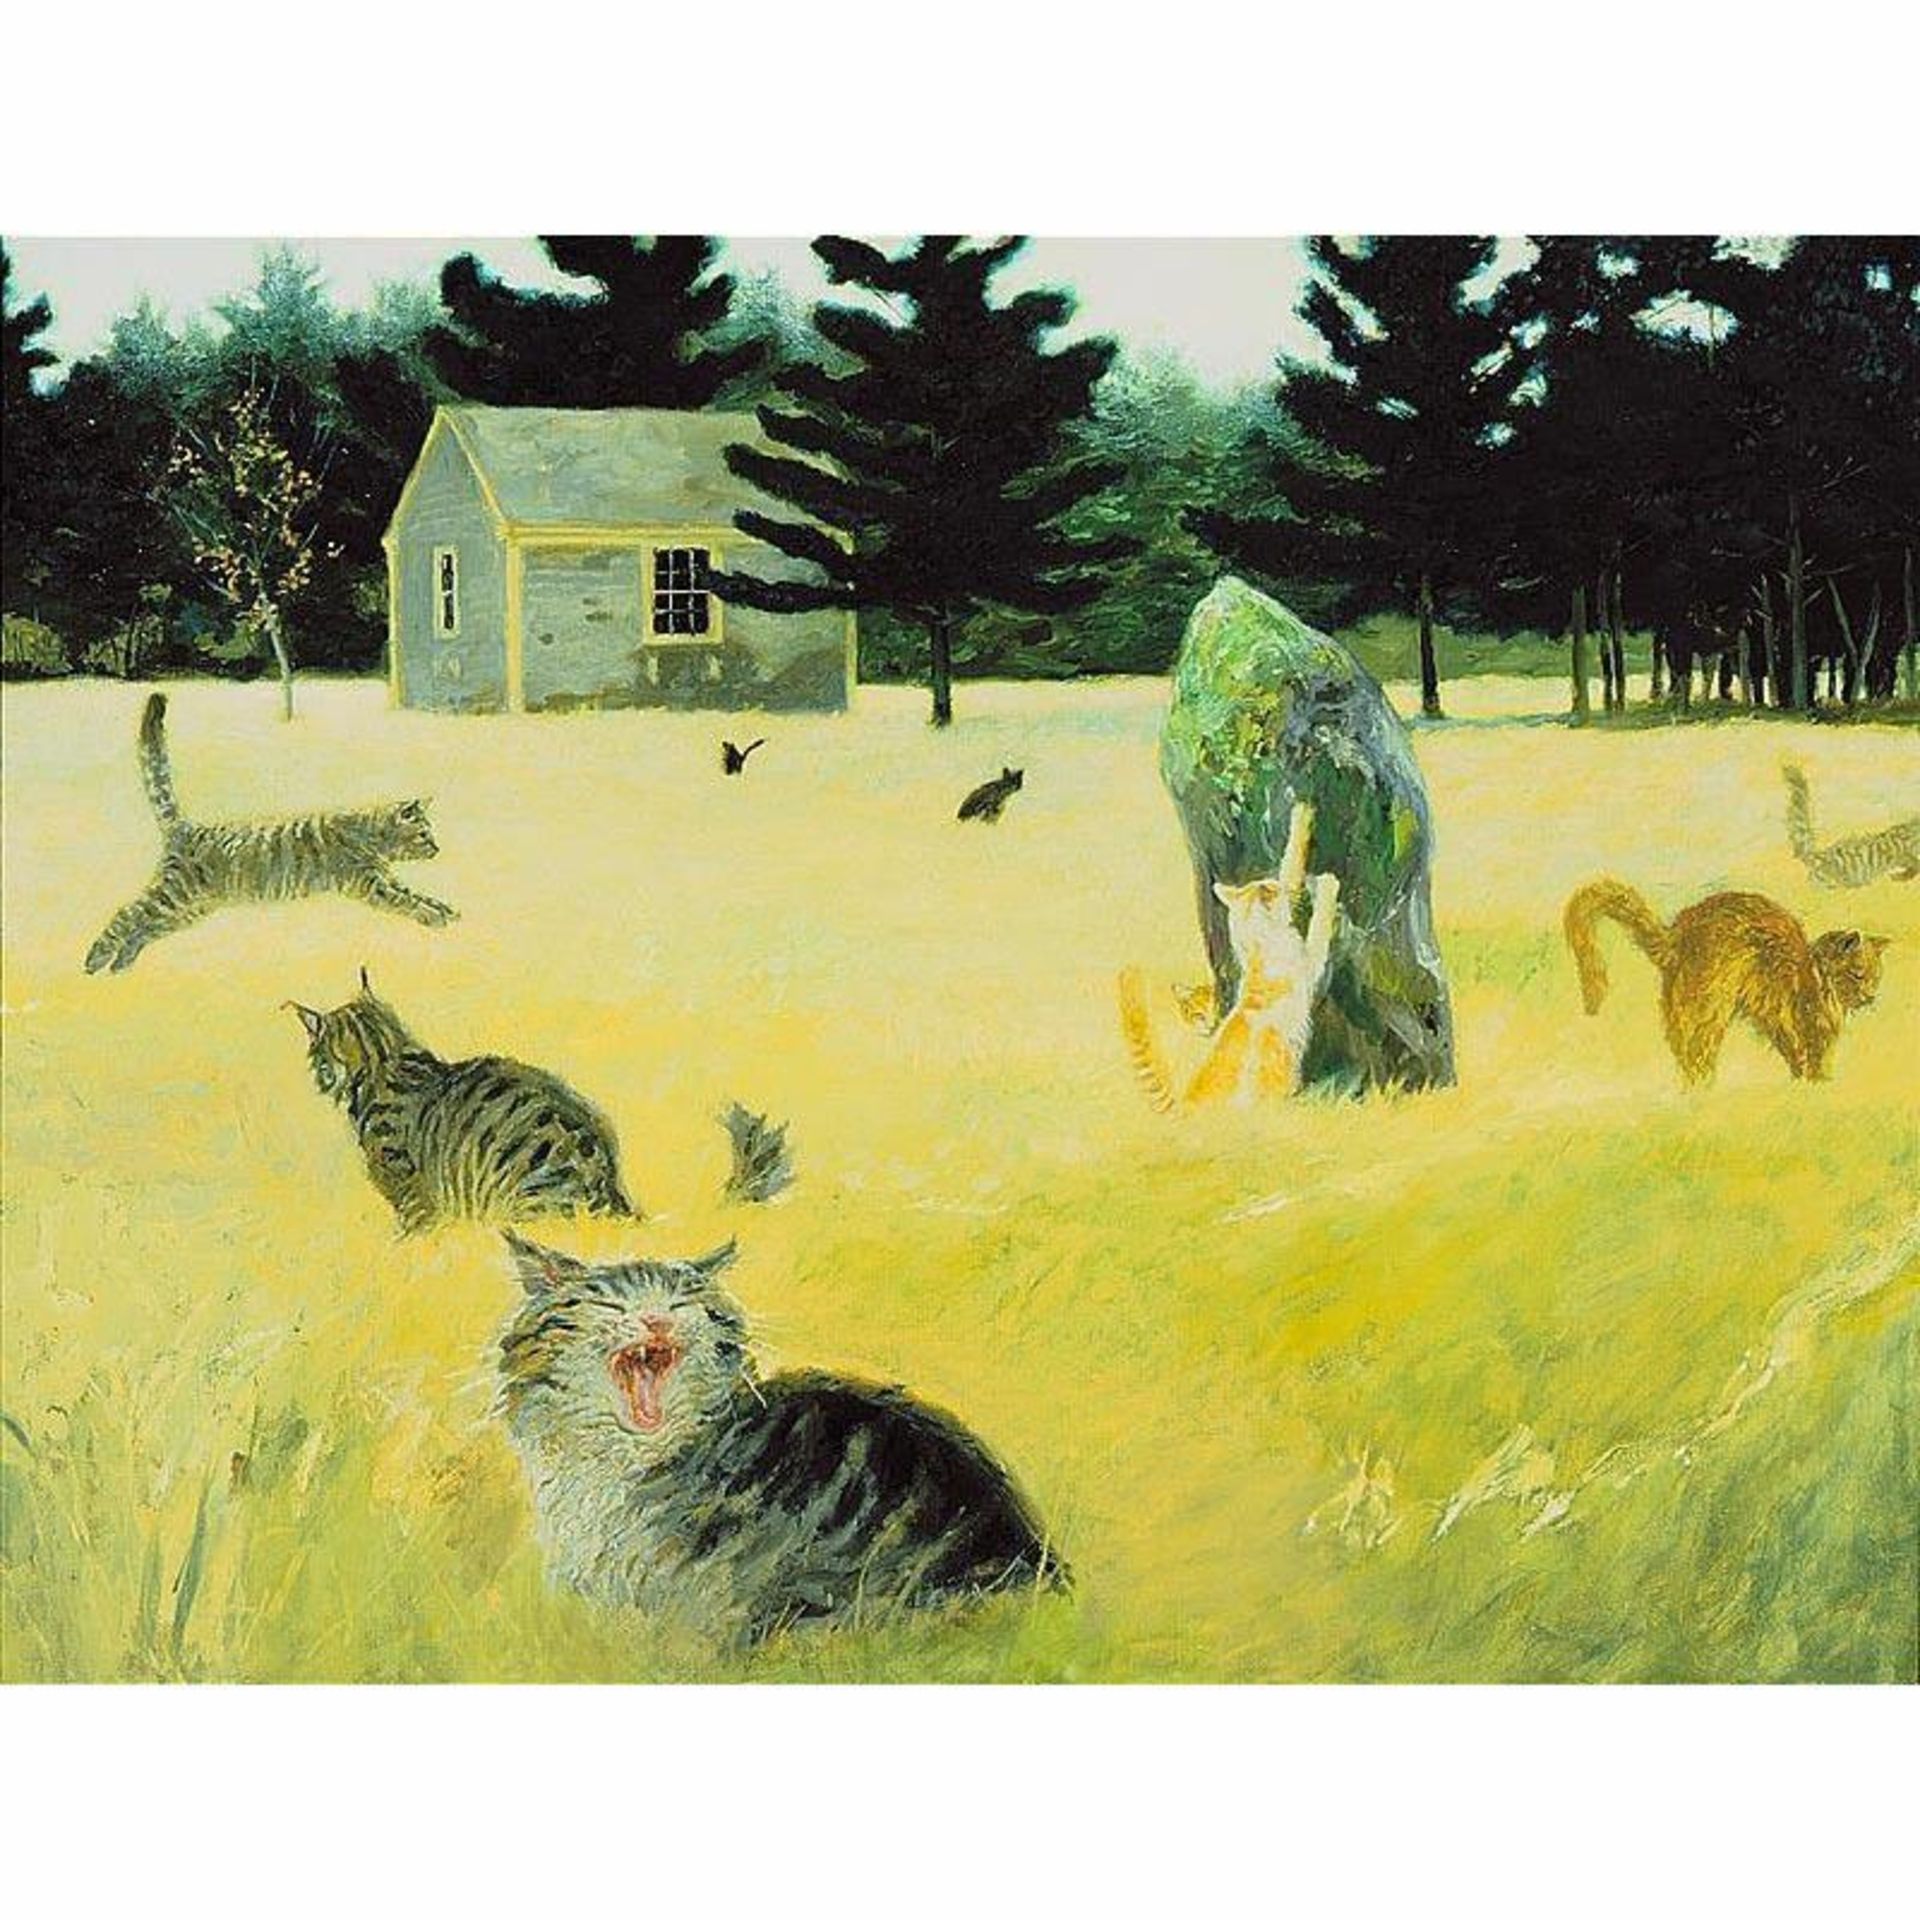 Jamie Wyeth "Maine Coon Cat, 1998" Offset Lithograph